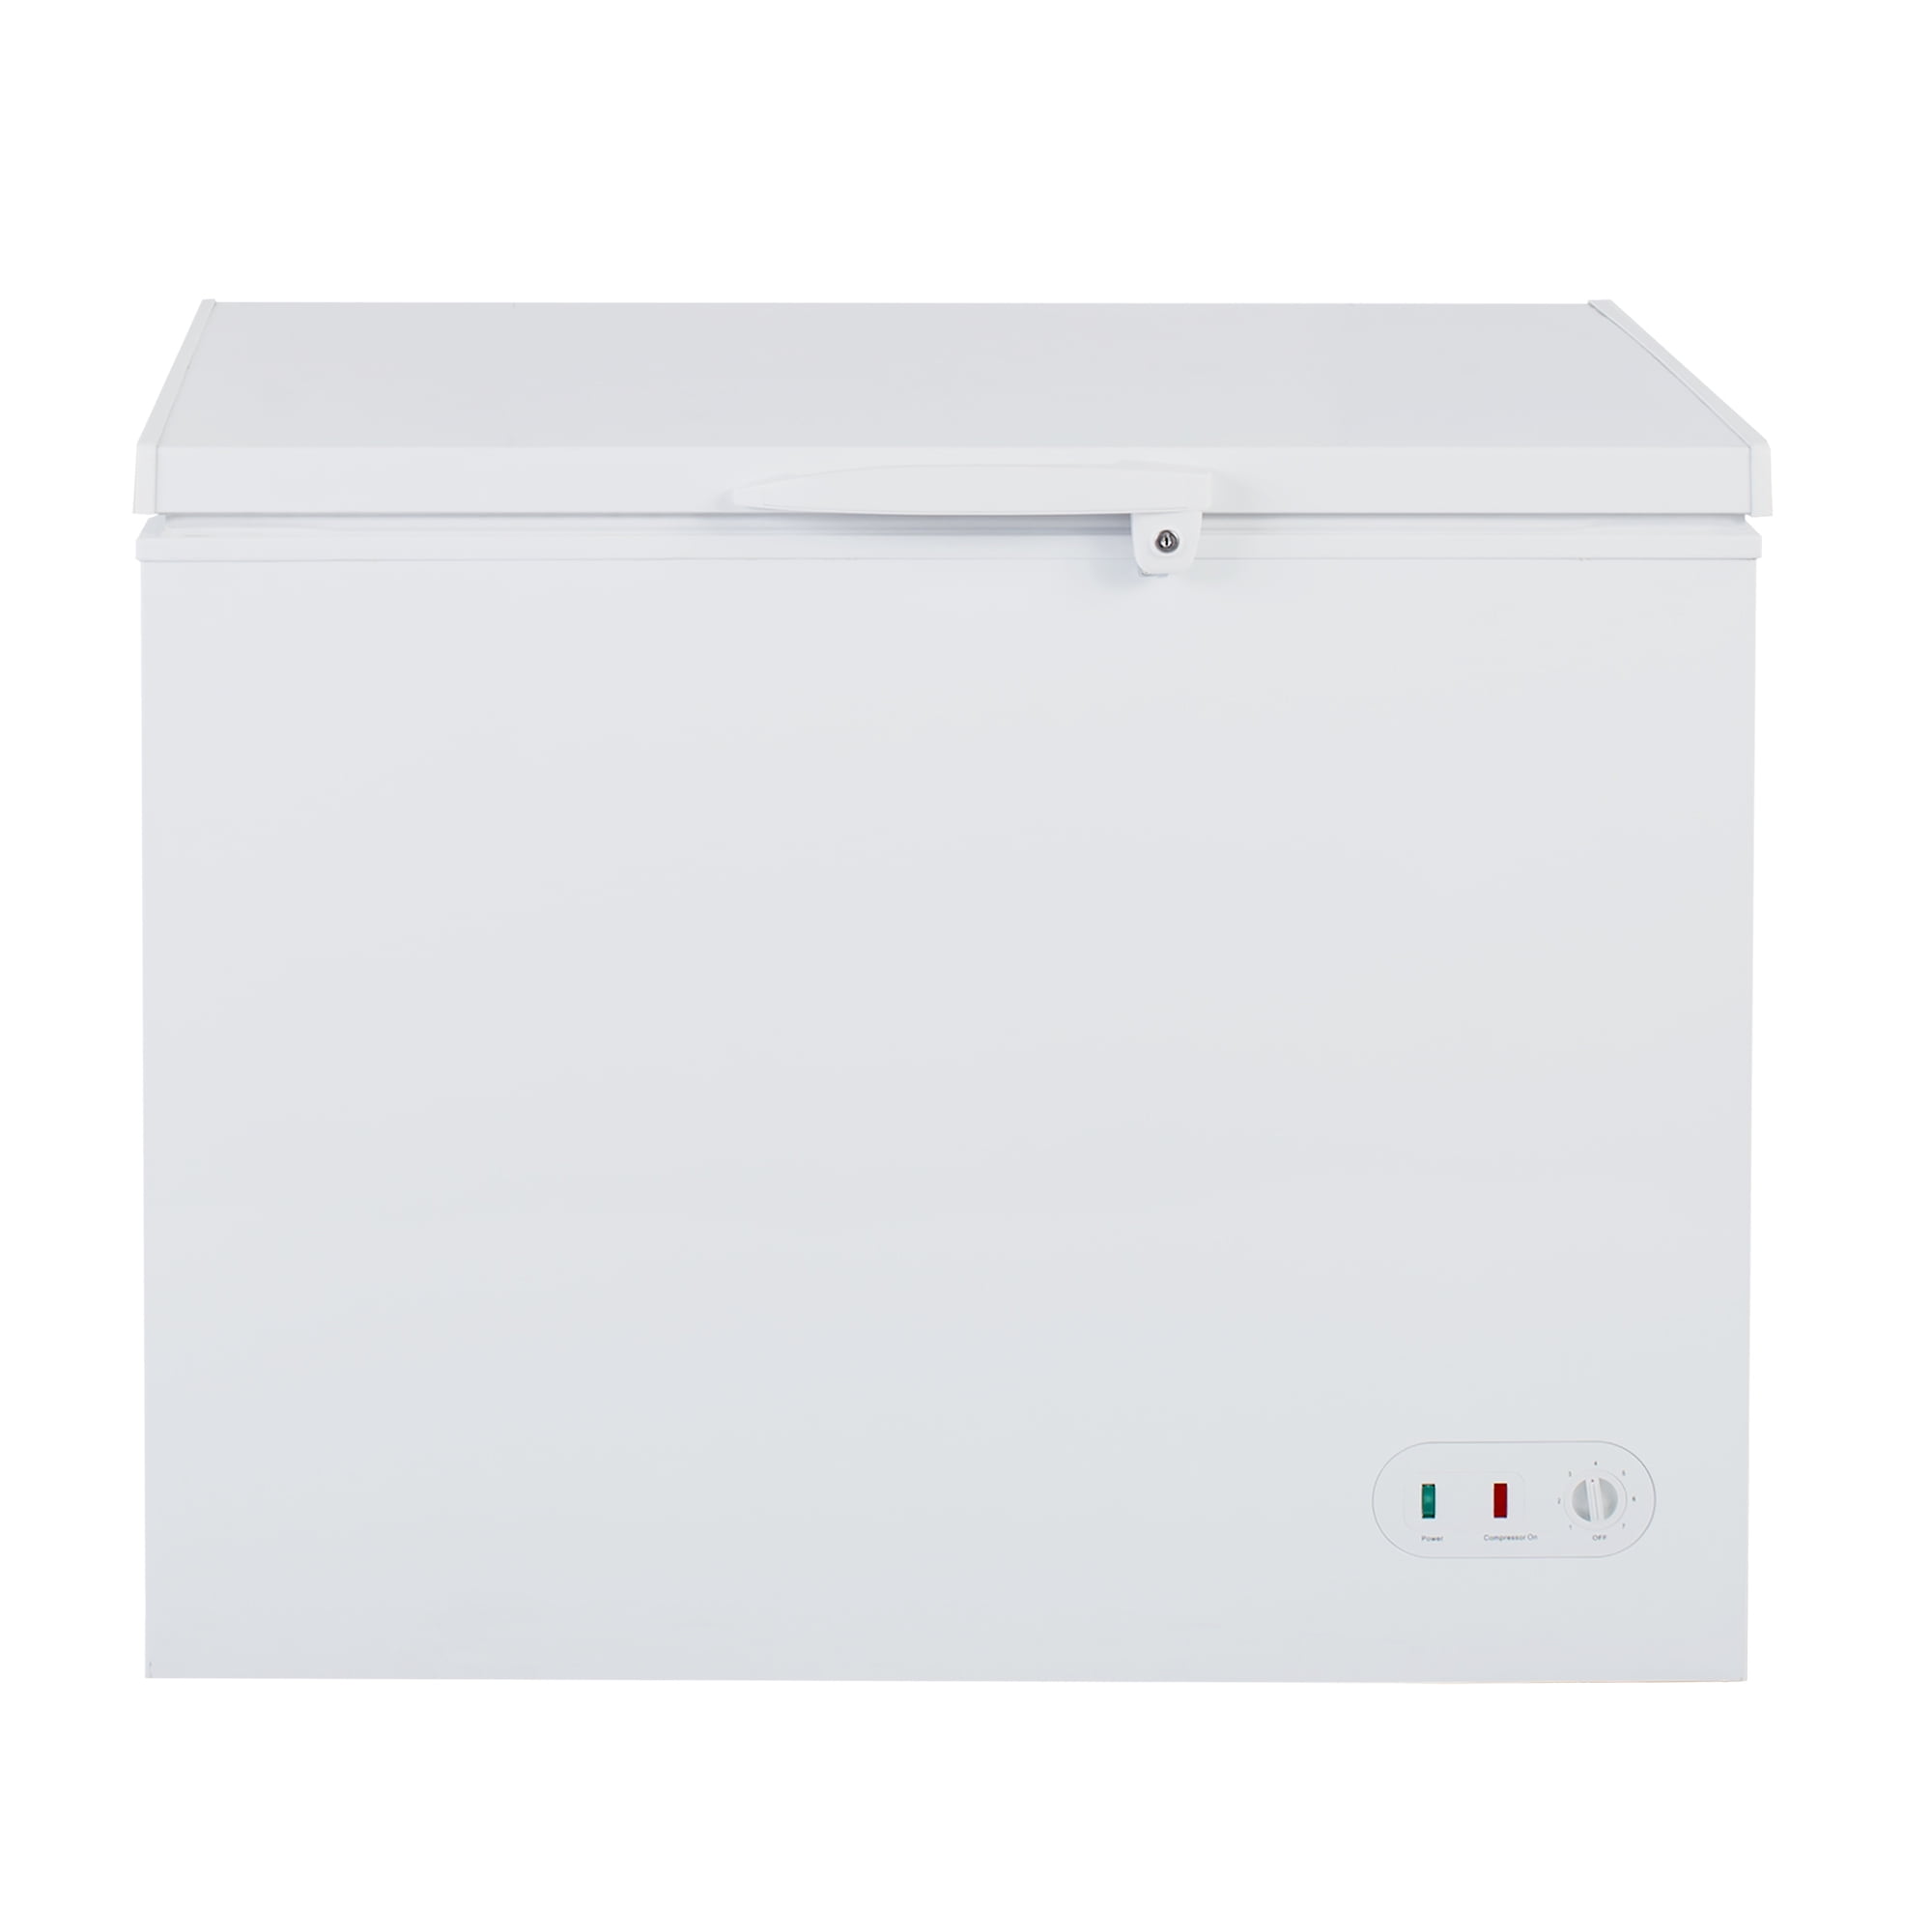 Maxx Cold Chest Freezer with Solid Top, 40.6